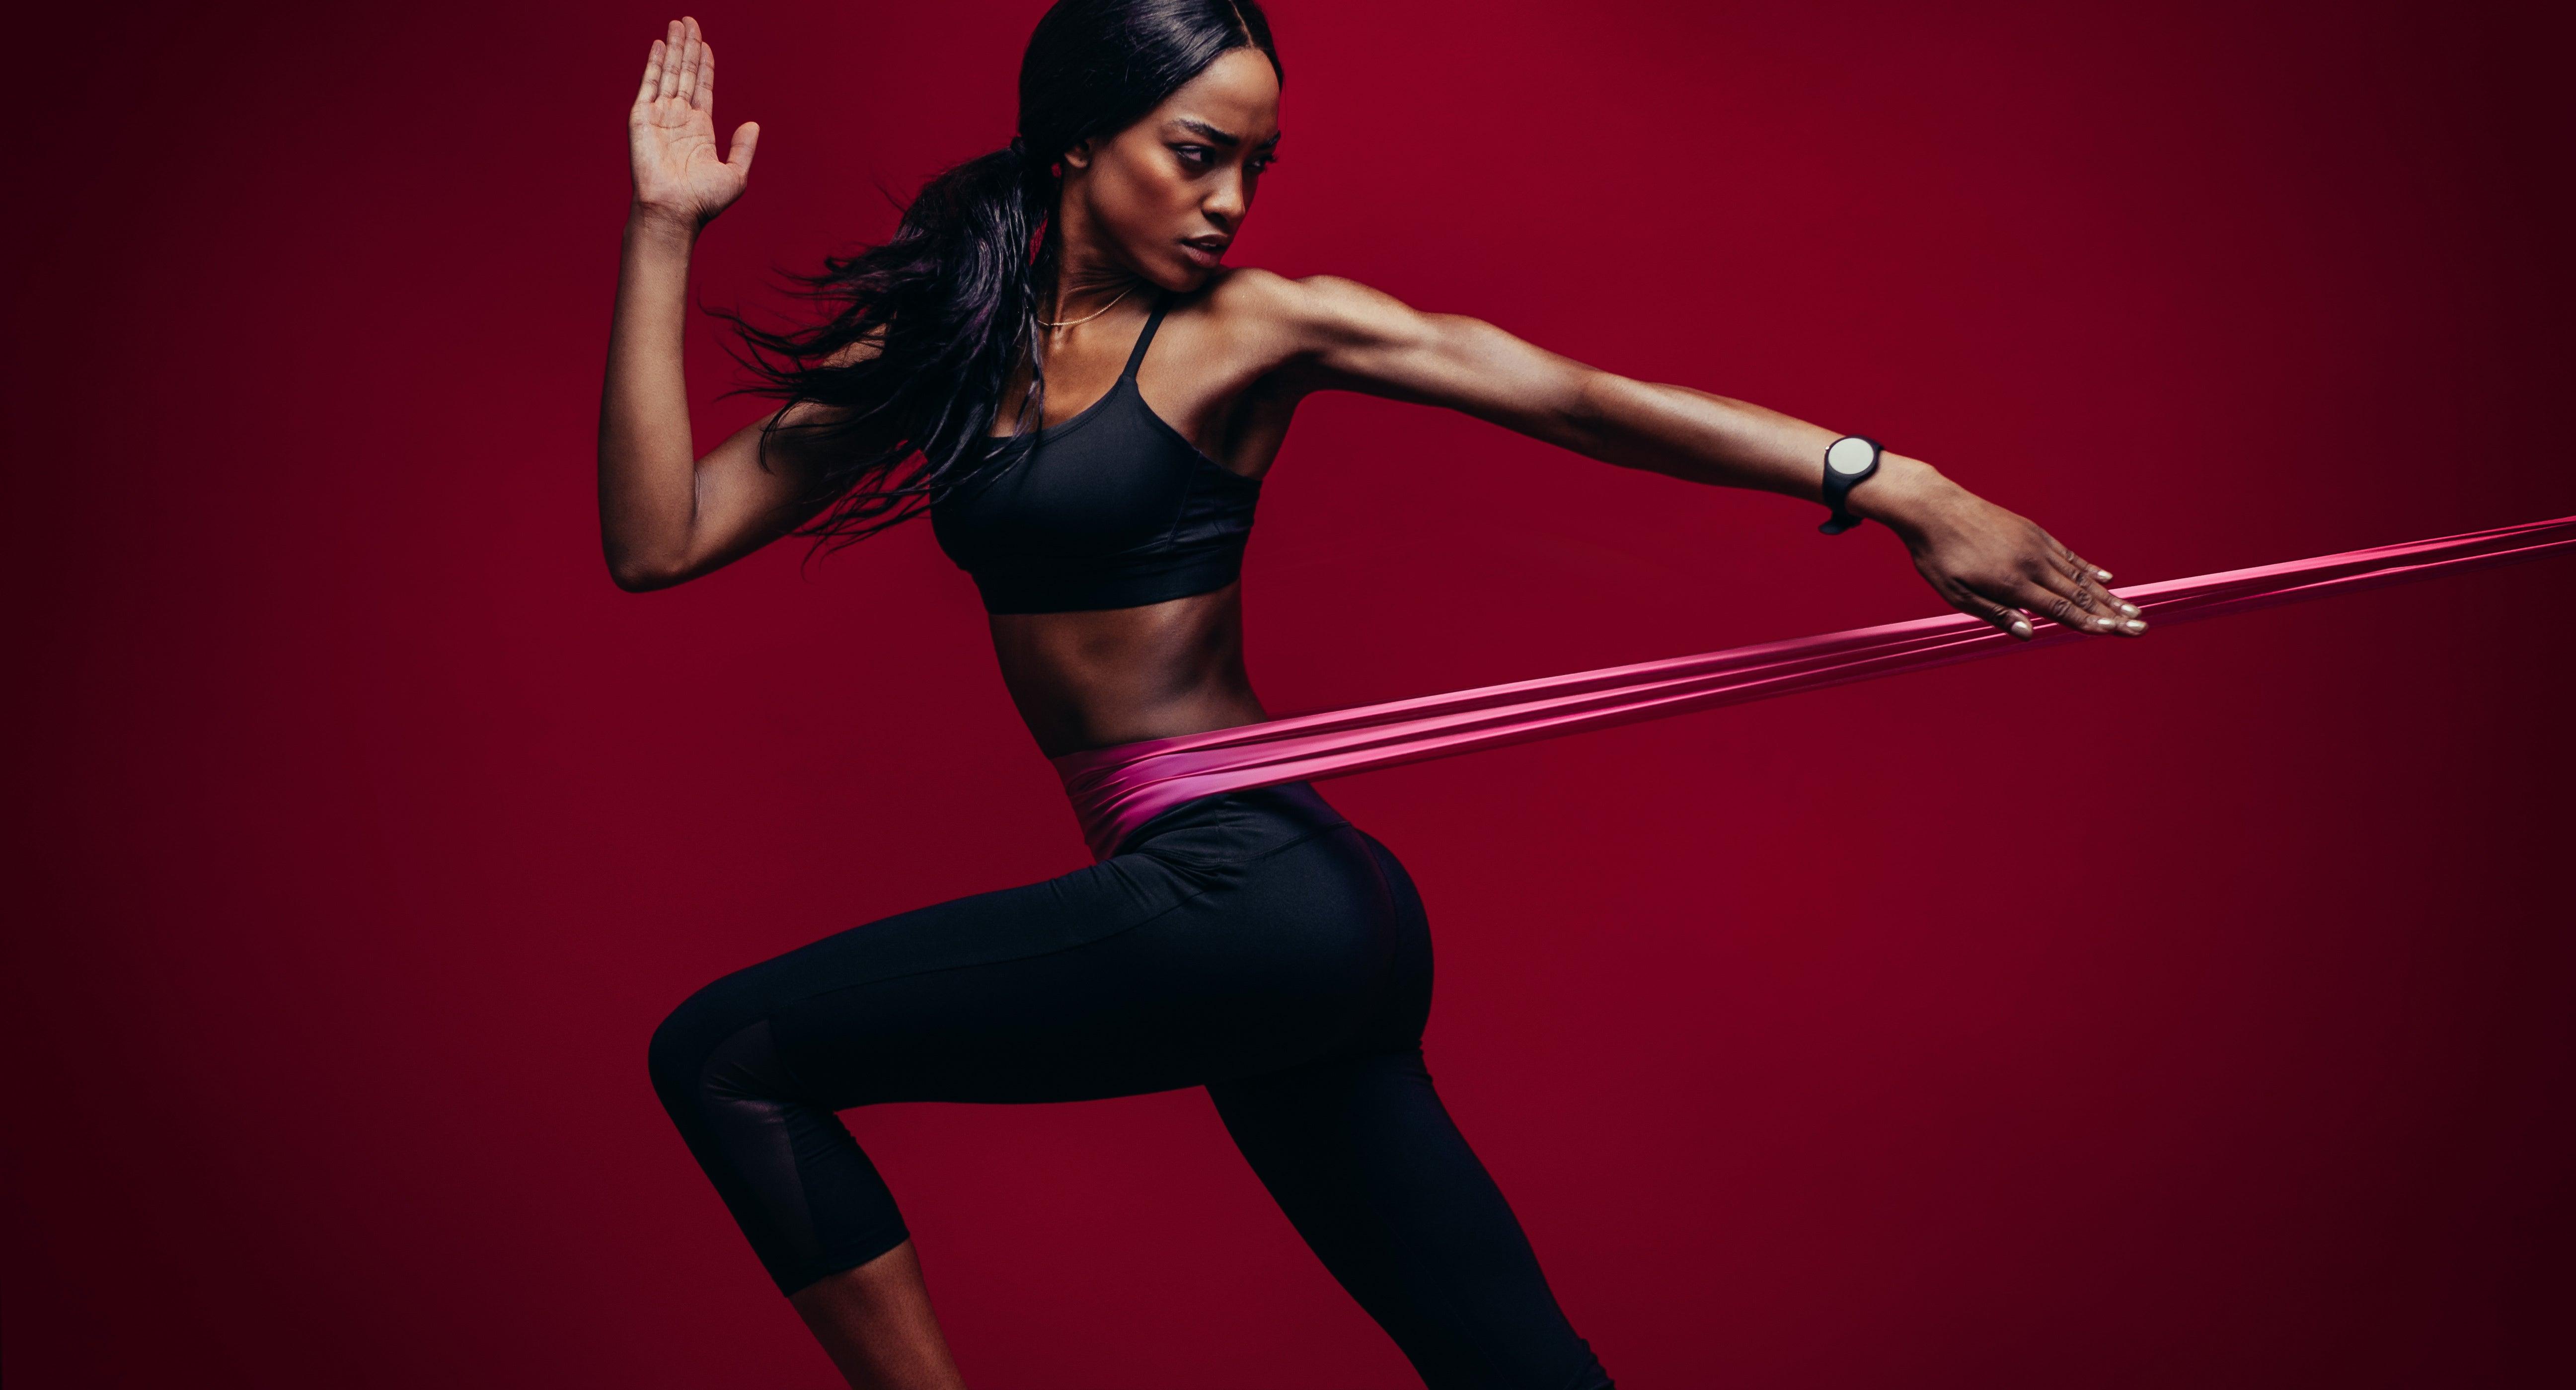 6 Black-Owned Fitness Equipment Brands to Help You Get Fit This Year - BlackOwned365